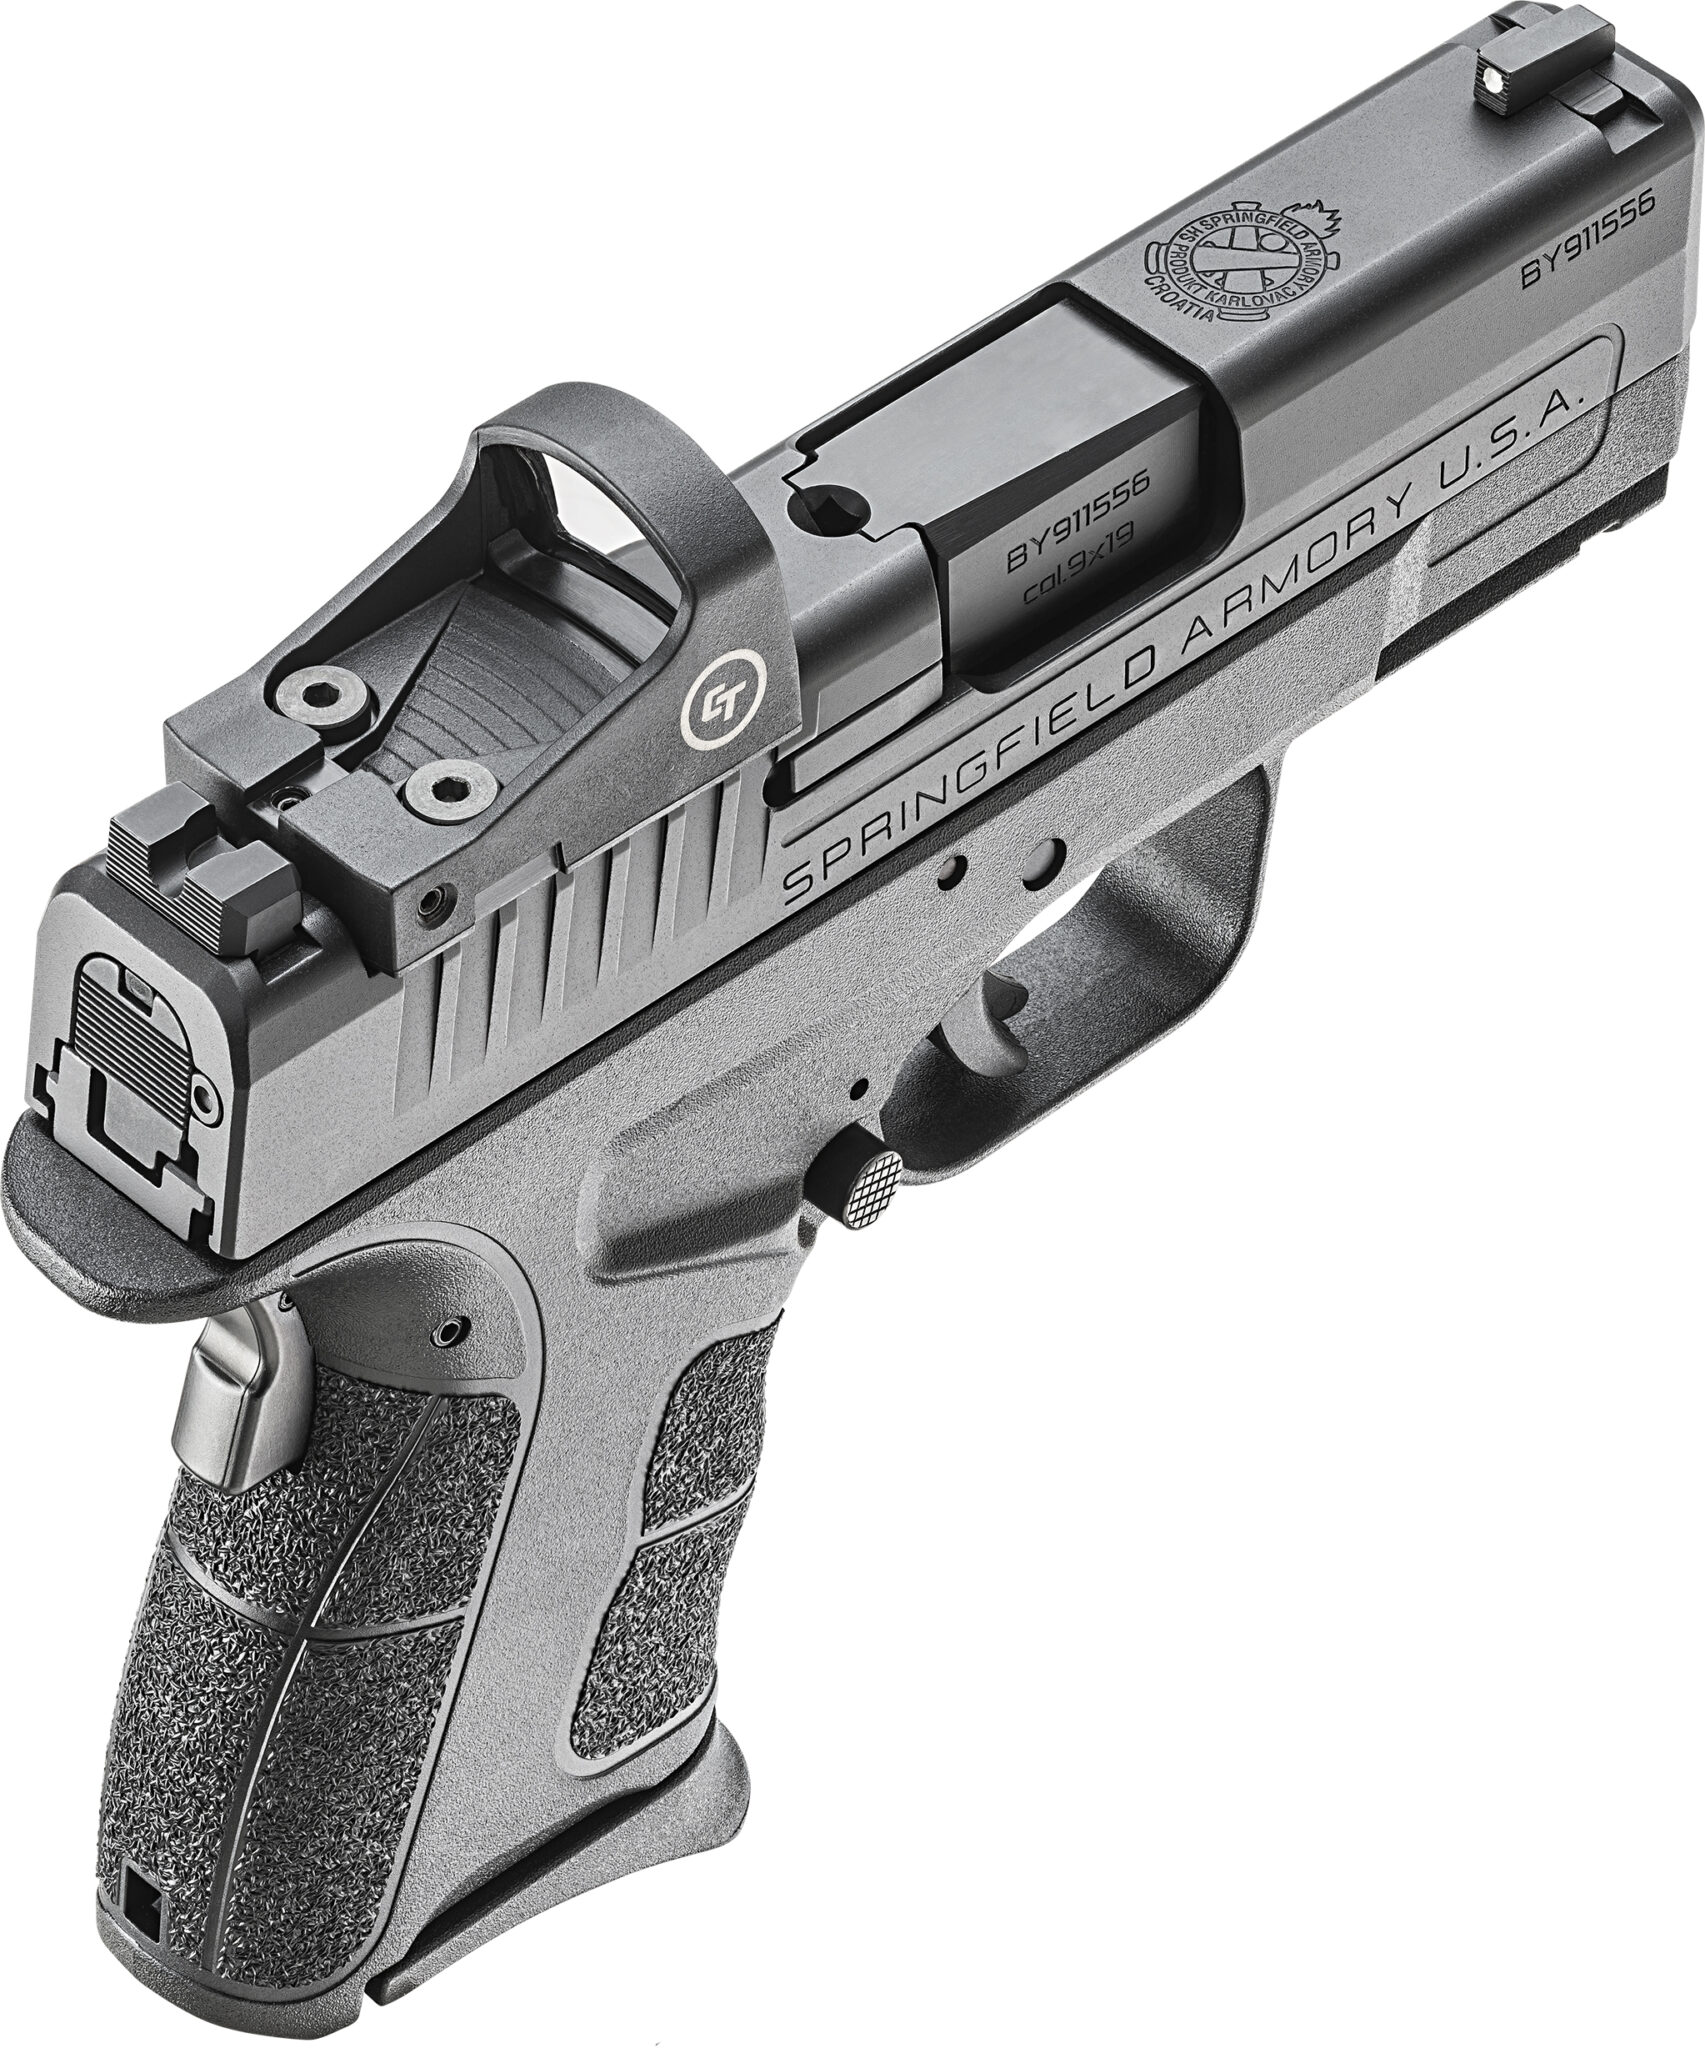 springfield xds 9mm accessories